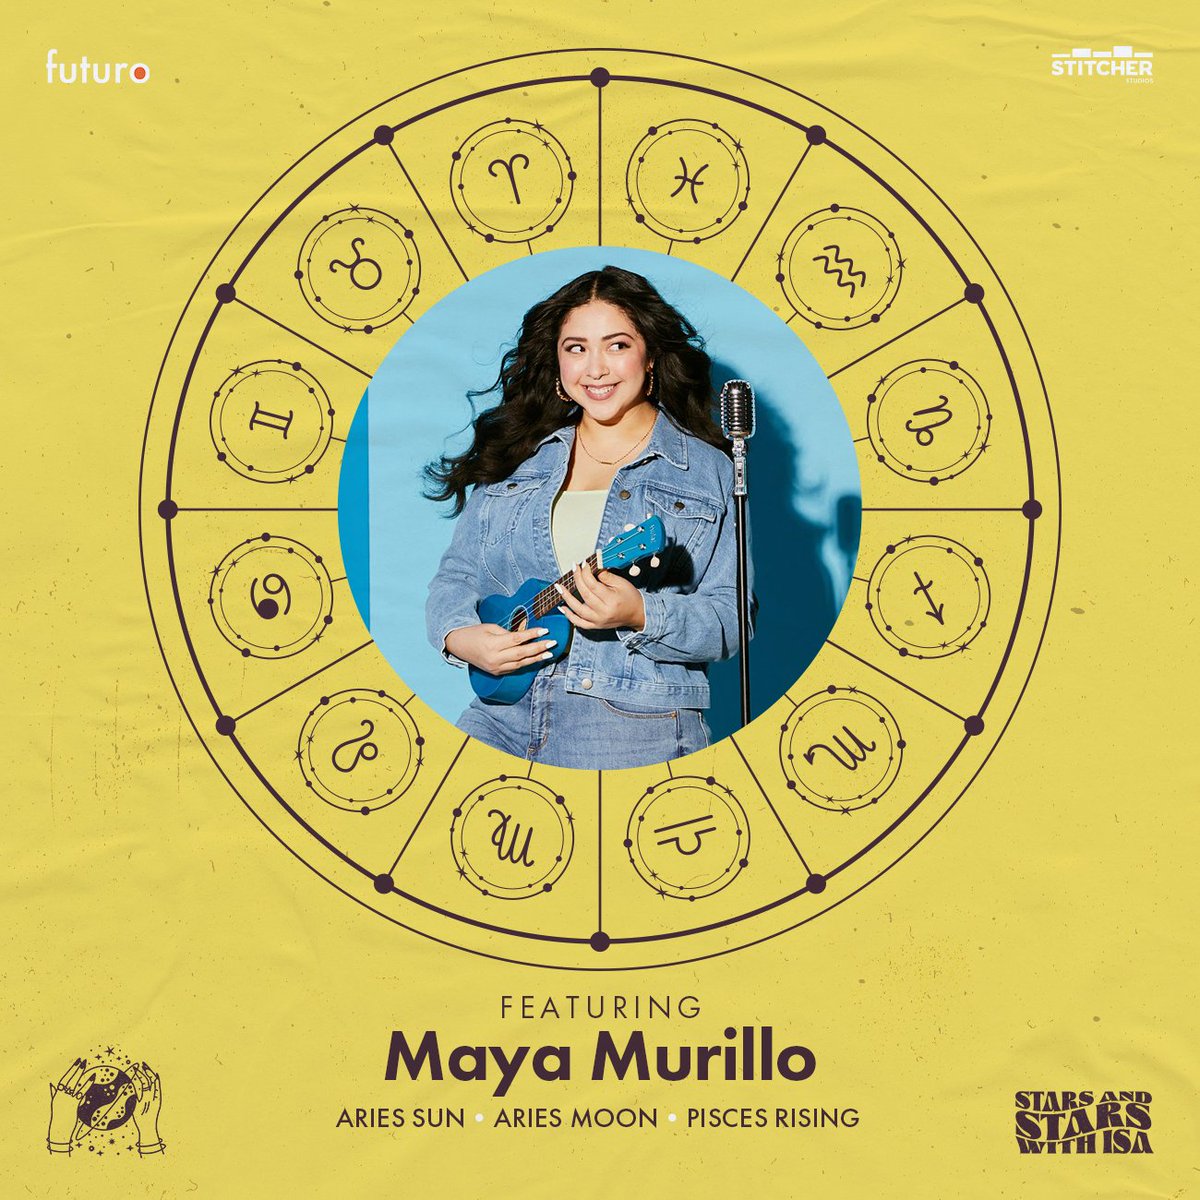 Episode 9 of #StarsandStarswithIsa is out!💫 Maya Murillo came up in the early days of social media when she started making humorous videos on Vine and YouTube at 16. Today, she’s on Instagram and TikTok as @mayainthemoment, making content as exuberant as her personality. 🧵1/2